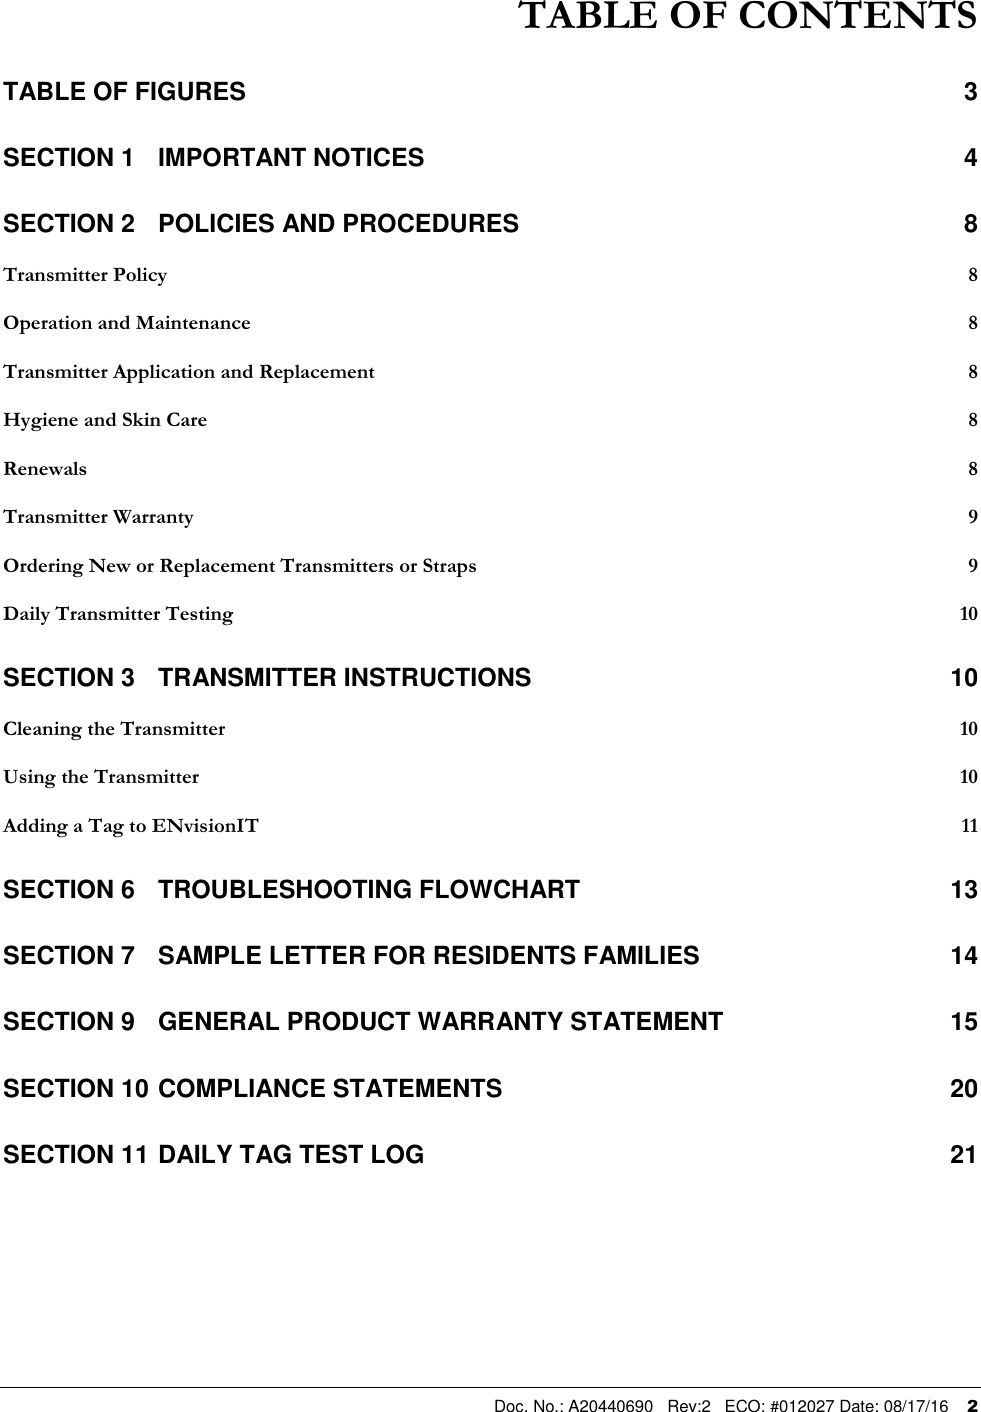  Doc. No.: A20440690   Rev:2   ECO: #012027 Date: 08/17/16    2 TABLE OF CONTENTS TABLE OF FIGURES  3 SECTION 1 IMPORTANT NOTICES  4 SECTION 2 POLICIES AND PROCEDURES  8 Transmitter Policy  8 Operation and Maintenance  8 Transmitter Application and Replacement  8 Hygiene and Skin Care  8 Renewals  8 Transmitter Warranty  9 Ordering New or Replacement Transmitters or Straps  9 Daily Transmitter Testing  10 SECTION 3 TRANSMITTER INSTRUCTIONS  10 Cleaning the Transmitter  10 Using the Transmitter  10 Adding a Tag to ENvisionIT  11 SECTION 6 TROUBLESHOOTING FLOWCHART  13 SECTION 7 SAMPLE LETTER FOR RESIDENTS FAMILIES  14 SECTION 9 GENERAL PRODUCT WARRANTY STATEMENT  15 SECTION 10 COMPLIANCE STATEMENTS  20 SECTION 11 DAILY TAG TEST LOG  21  